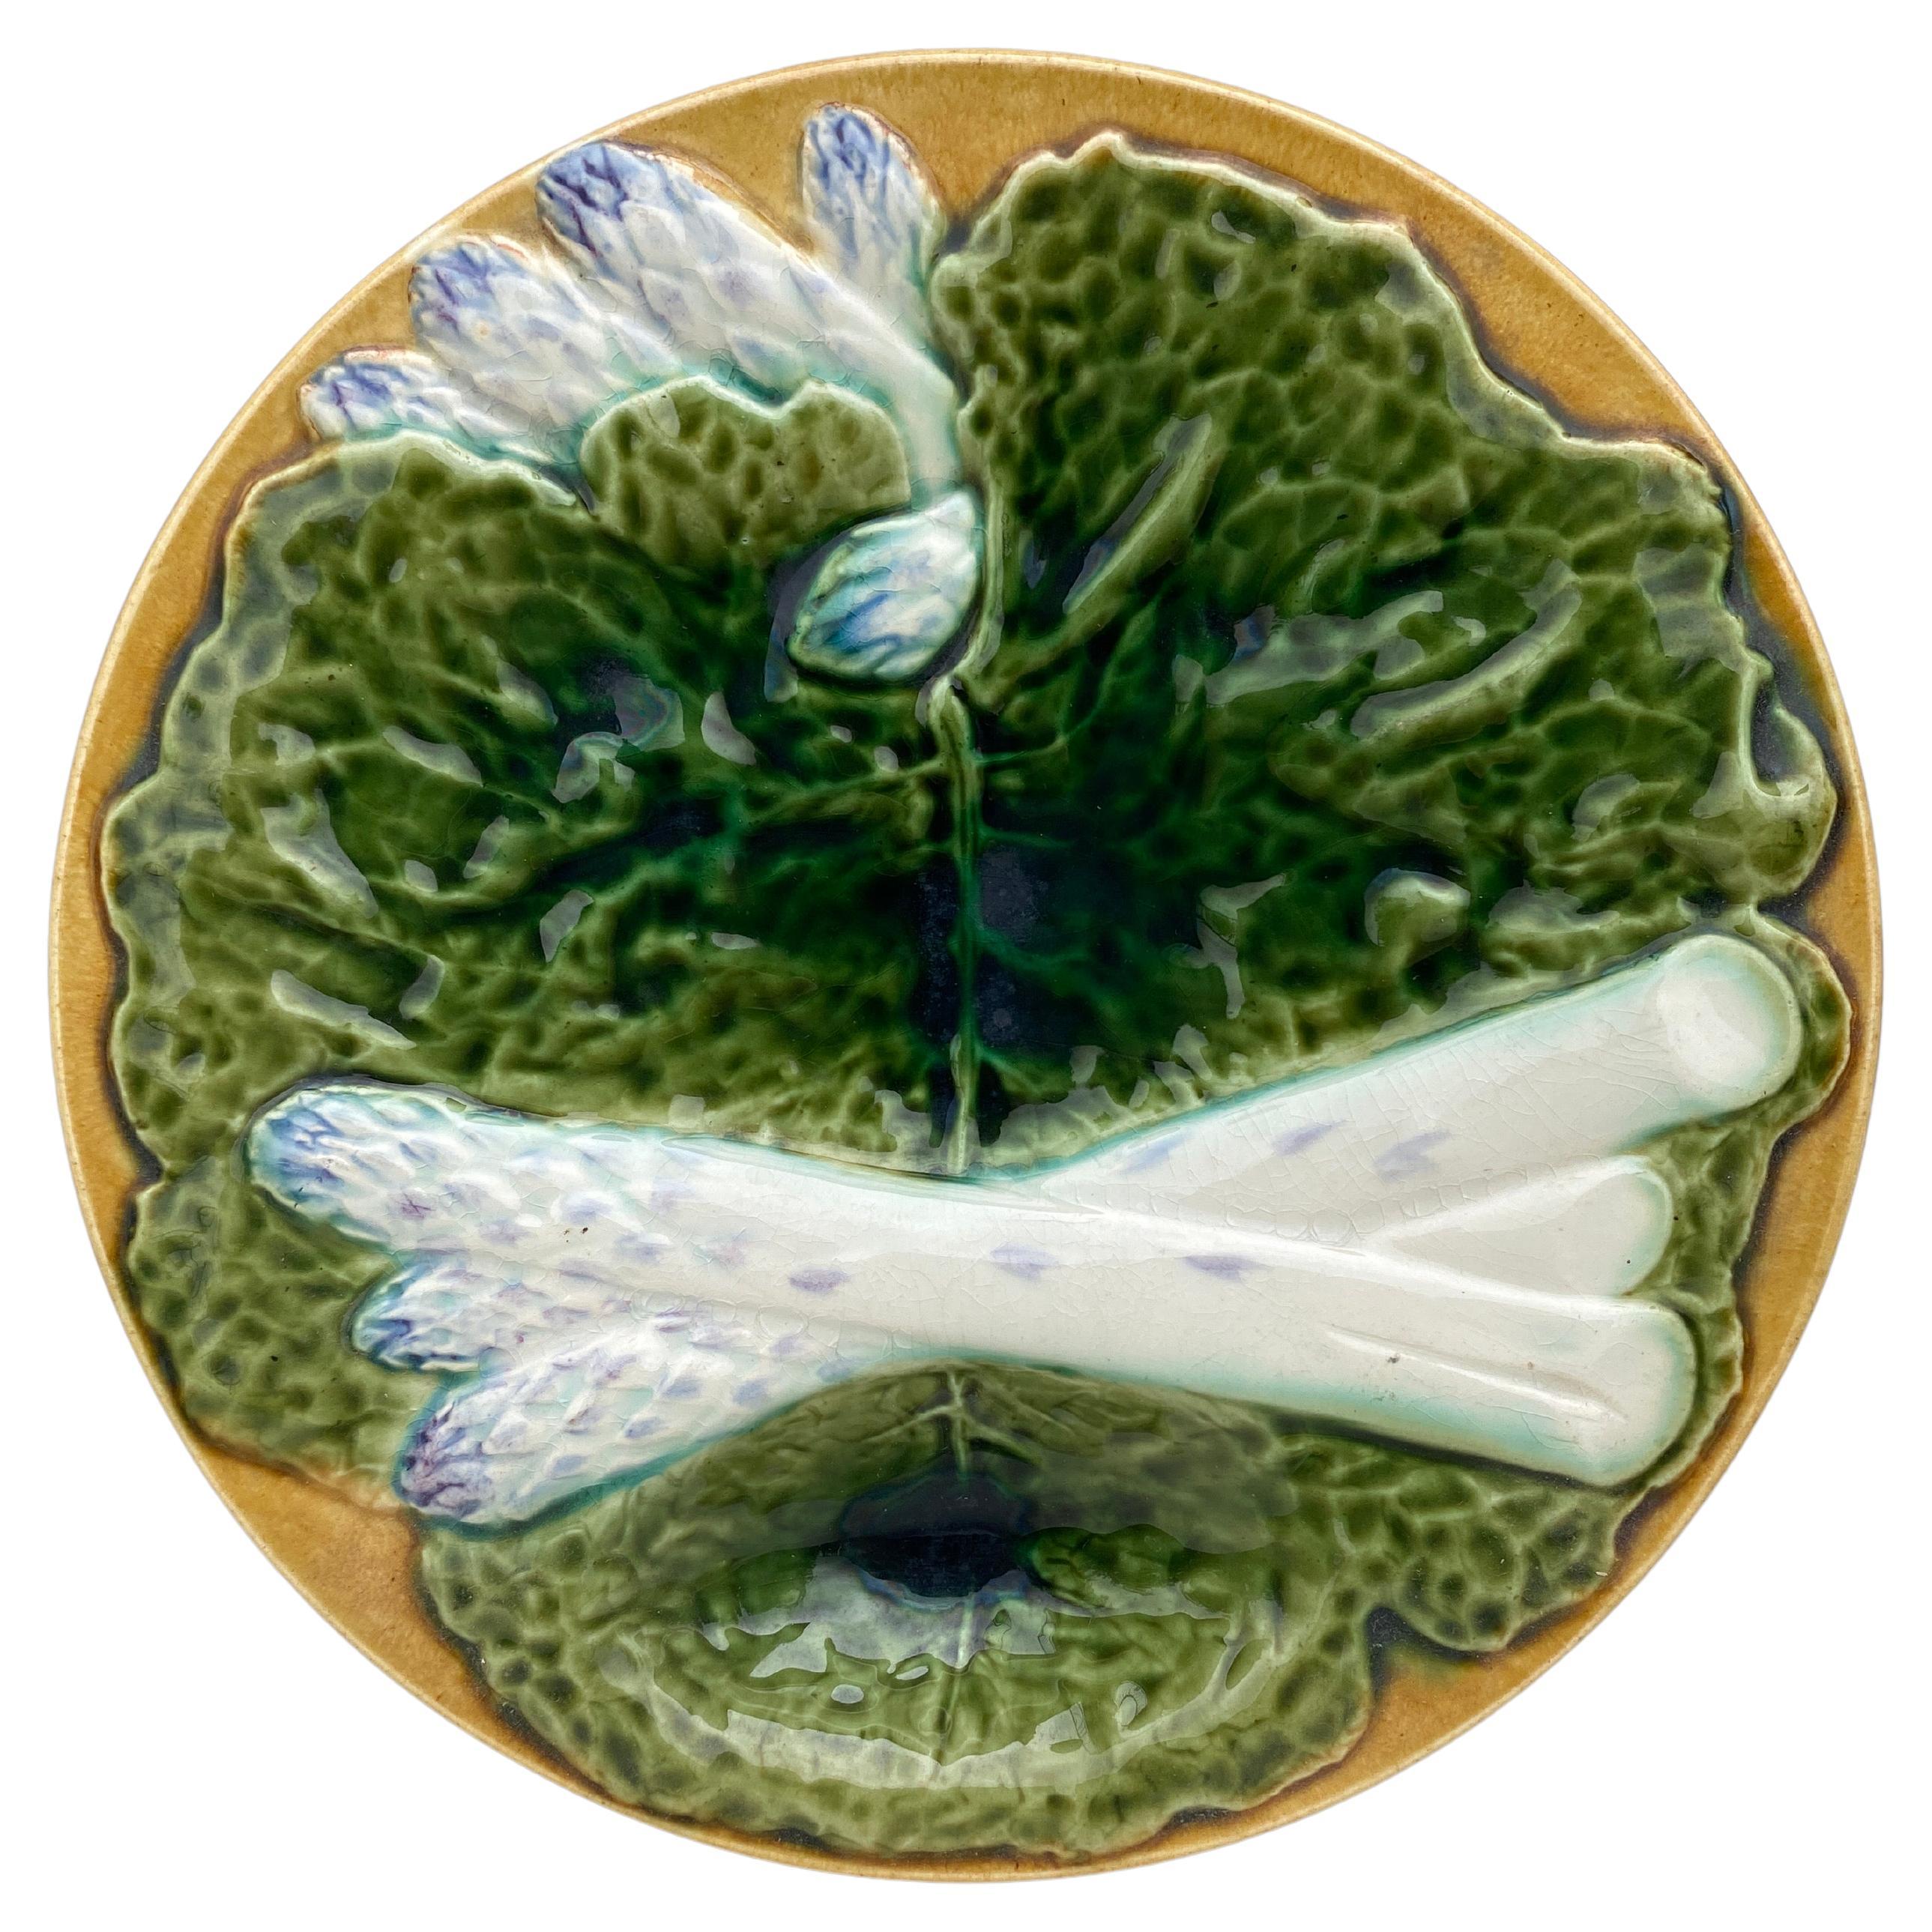 19th Century Majolica Asparagus Plate with Cabbage Leaves Creil & Montereau